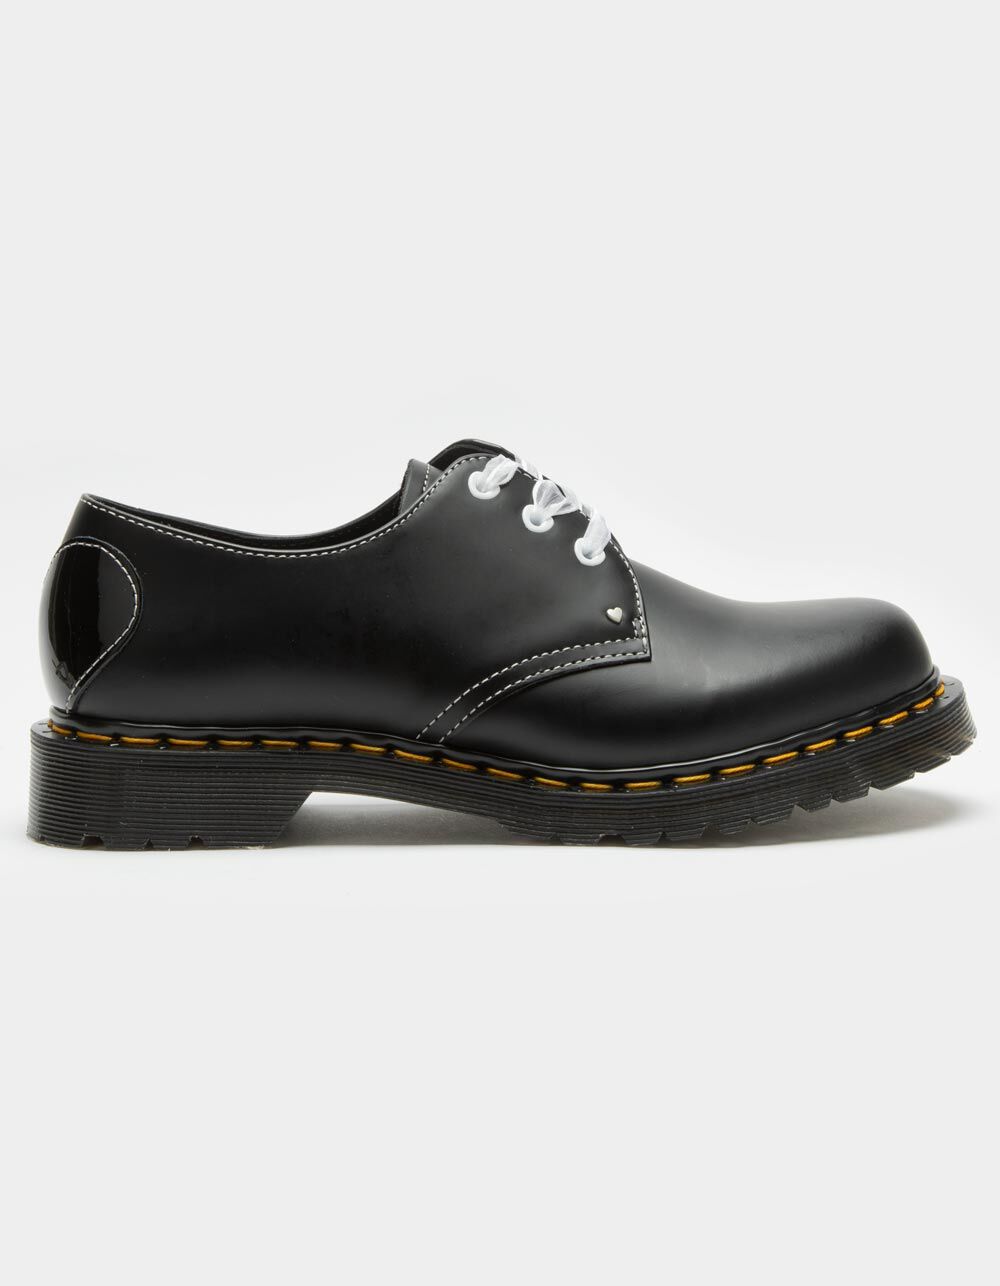 DR. MARTENS 1461 Hearts Smooth & Patent Leather Womens Oxford Shoes ...